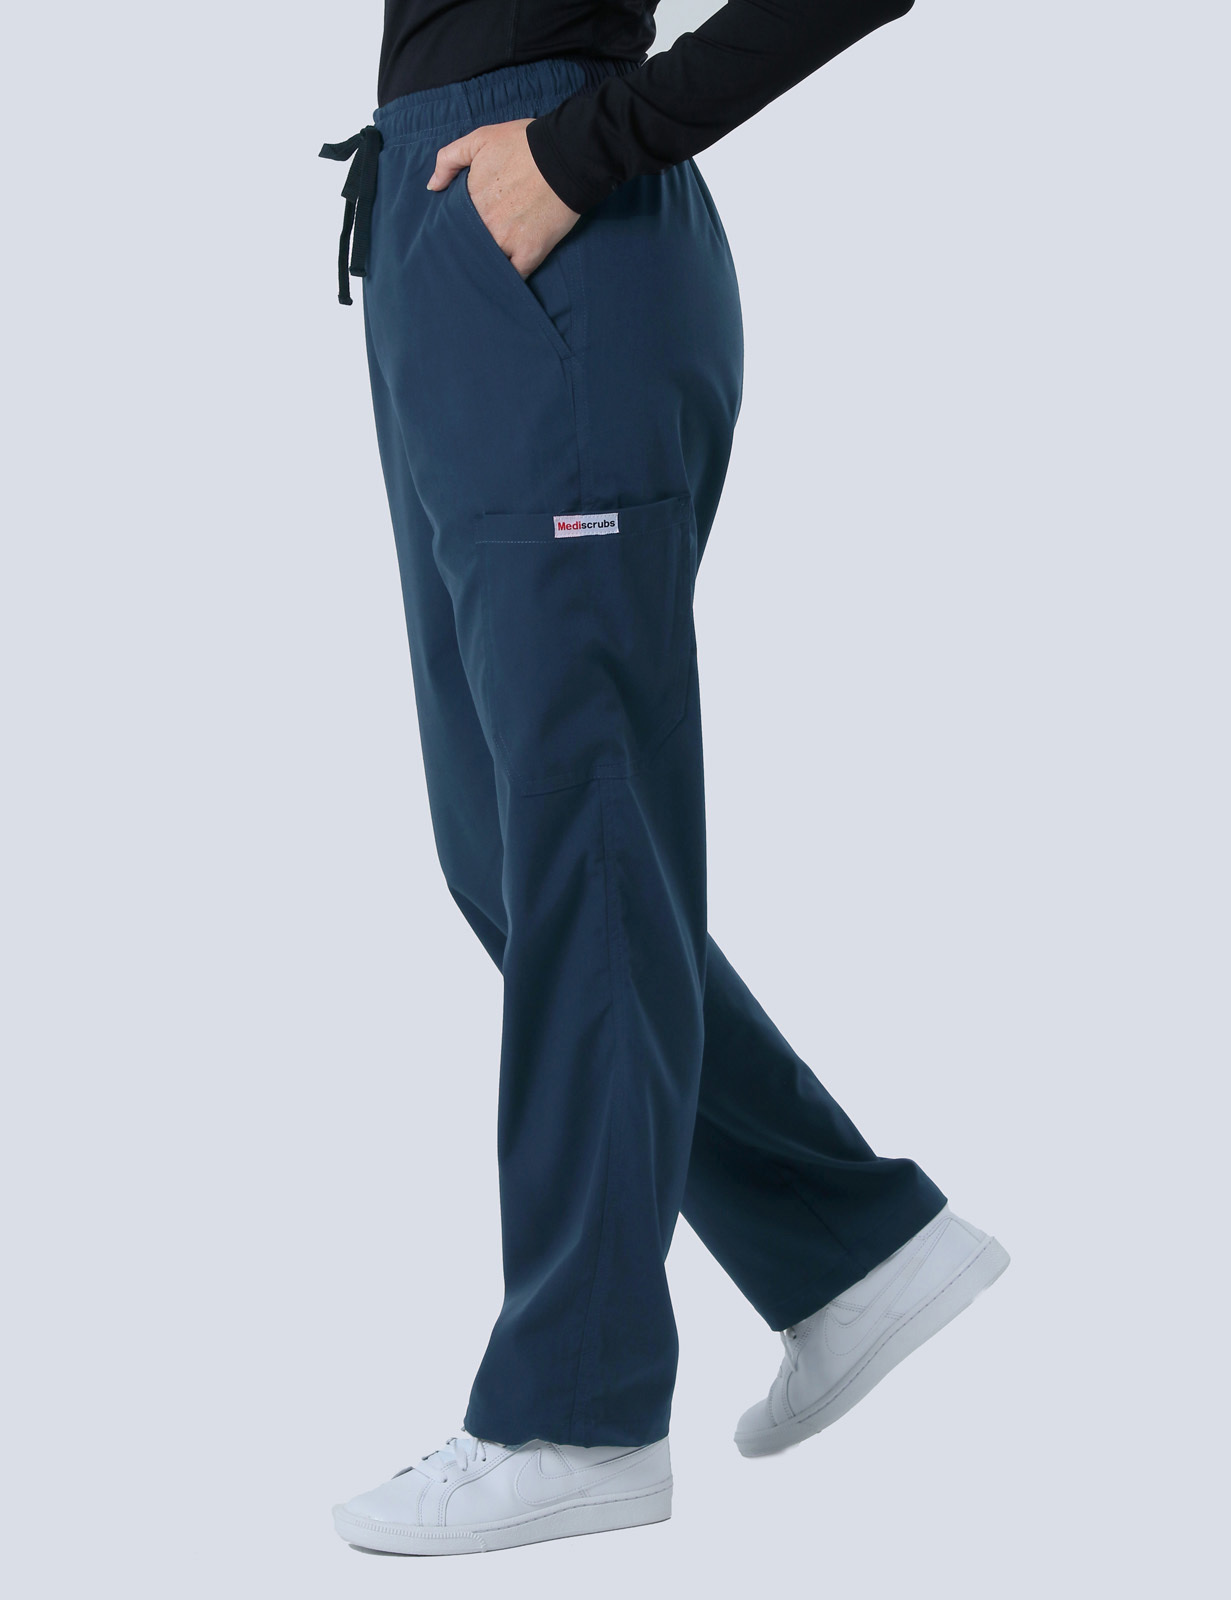 RBWH - 7BN Neurology and Stroke NUM (Women's Fit Spandex Scrub Top and Cargo Pants in Navy incl logos)